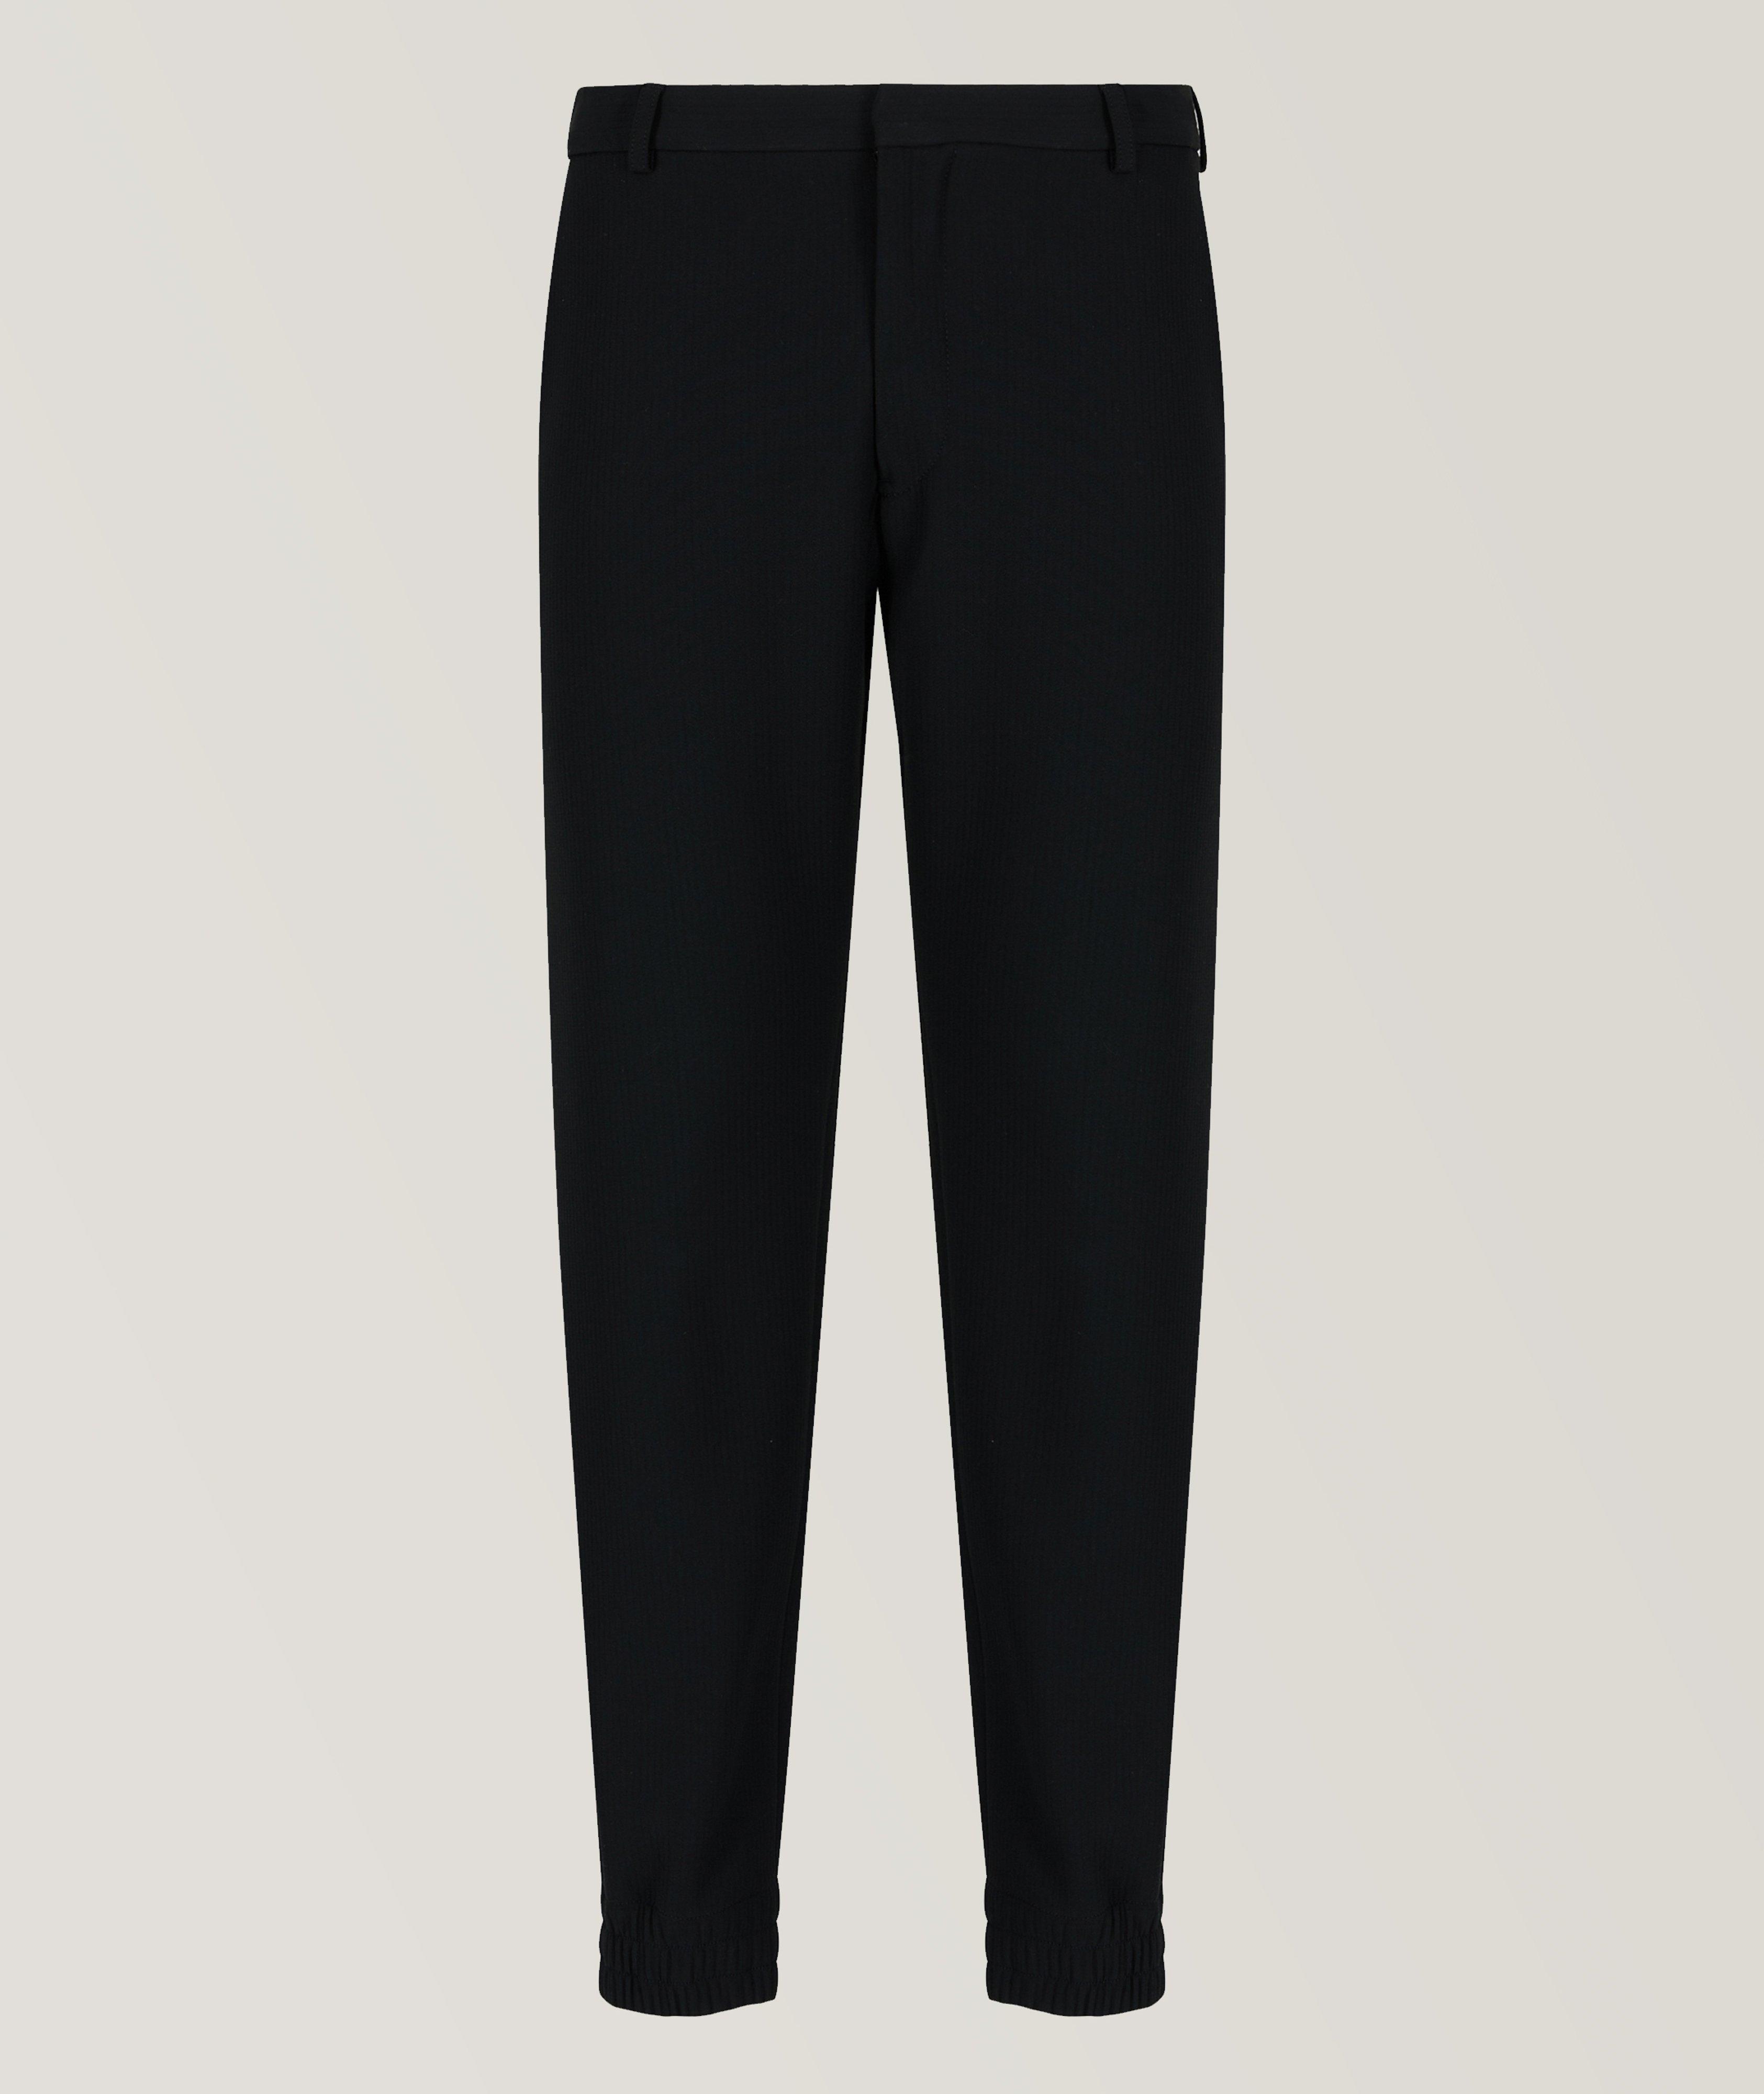 Cannette Technical Fabric Trousers image 0